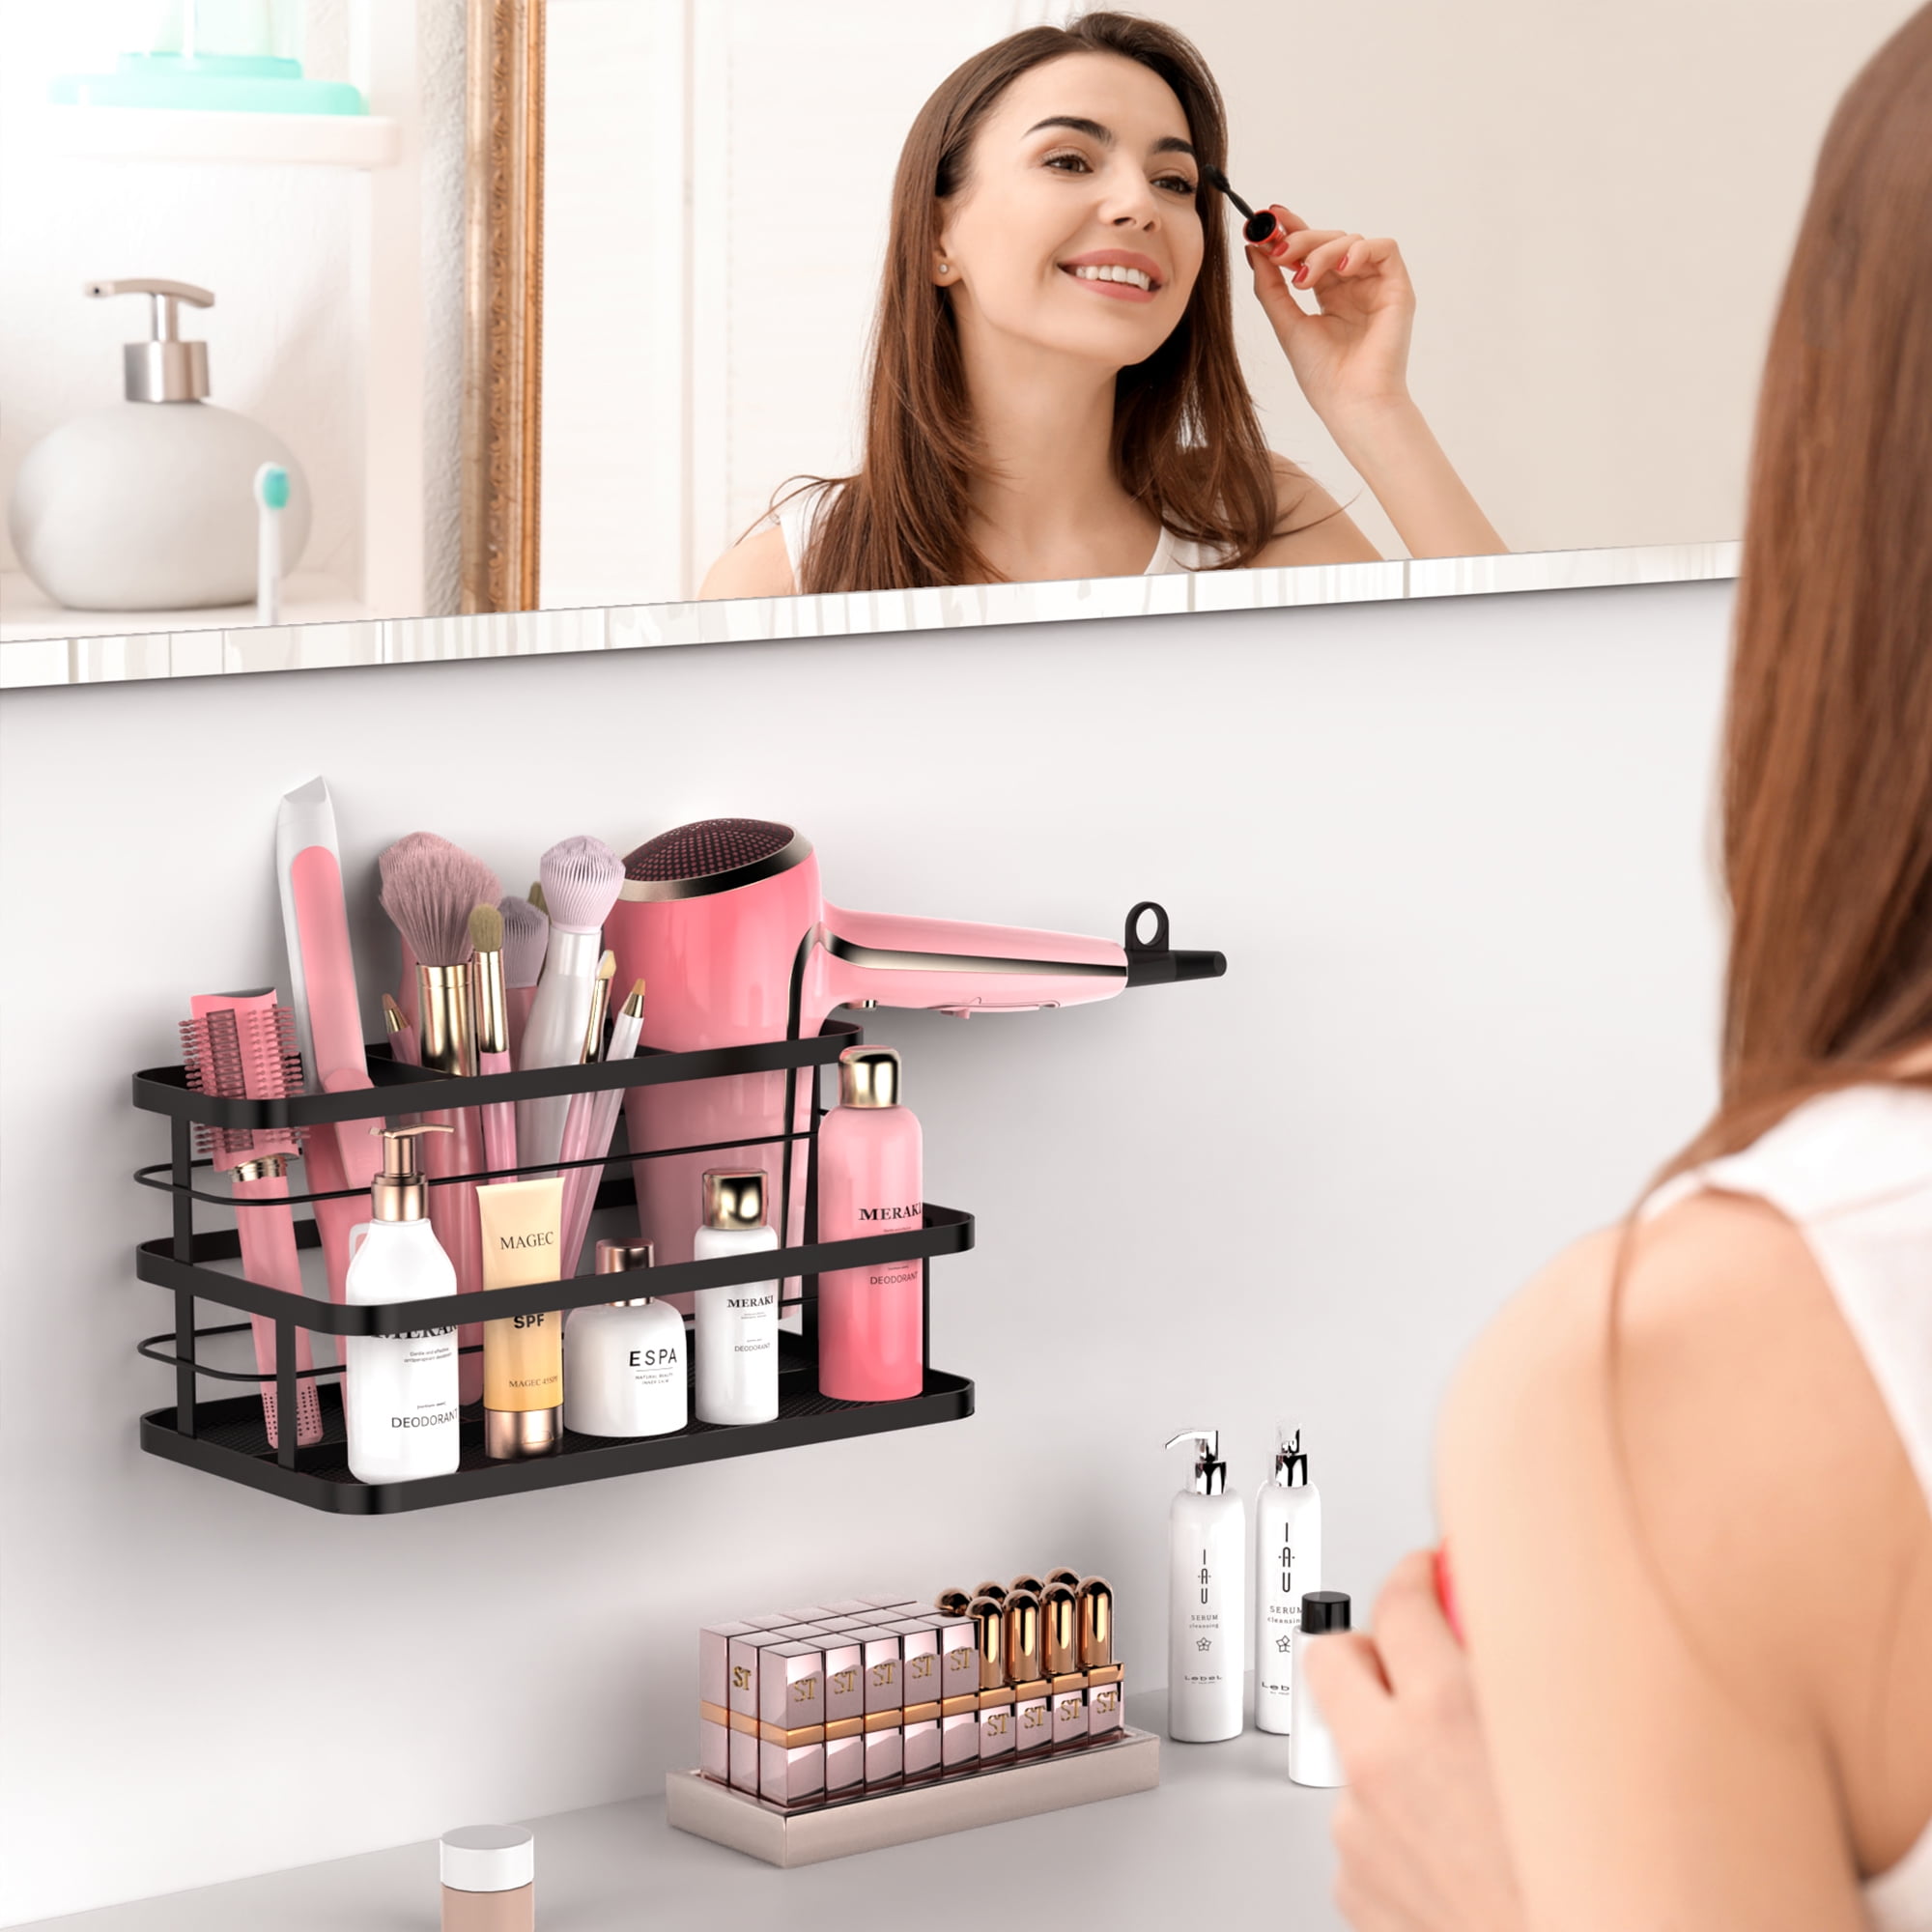 Hesroicy Wall-Mounted Makeup Brush Holder Organizer with 6 Branches for  Drying and Storage of Beauty Brushes and Blender Tools, Self-Adhesive Rack  